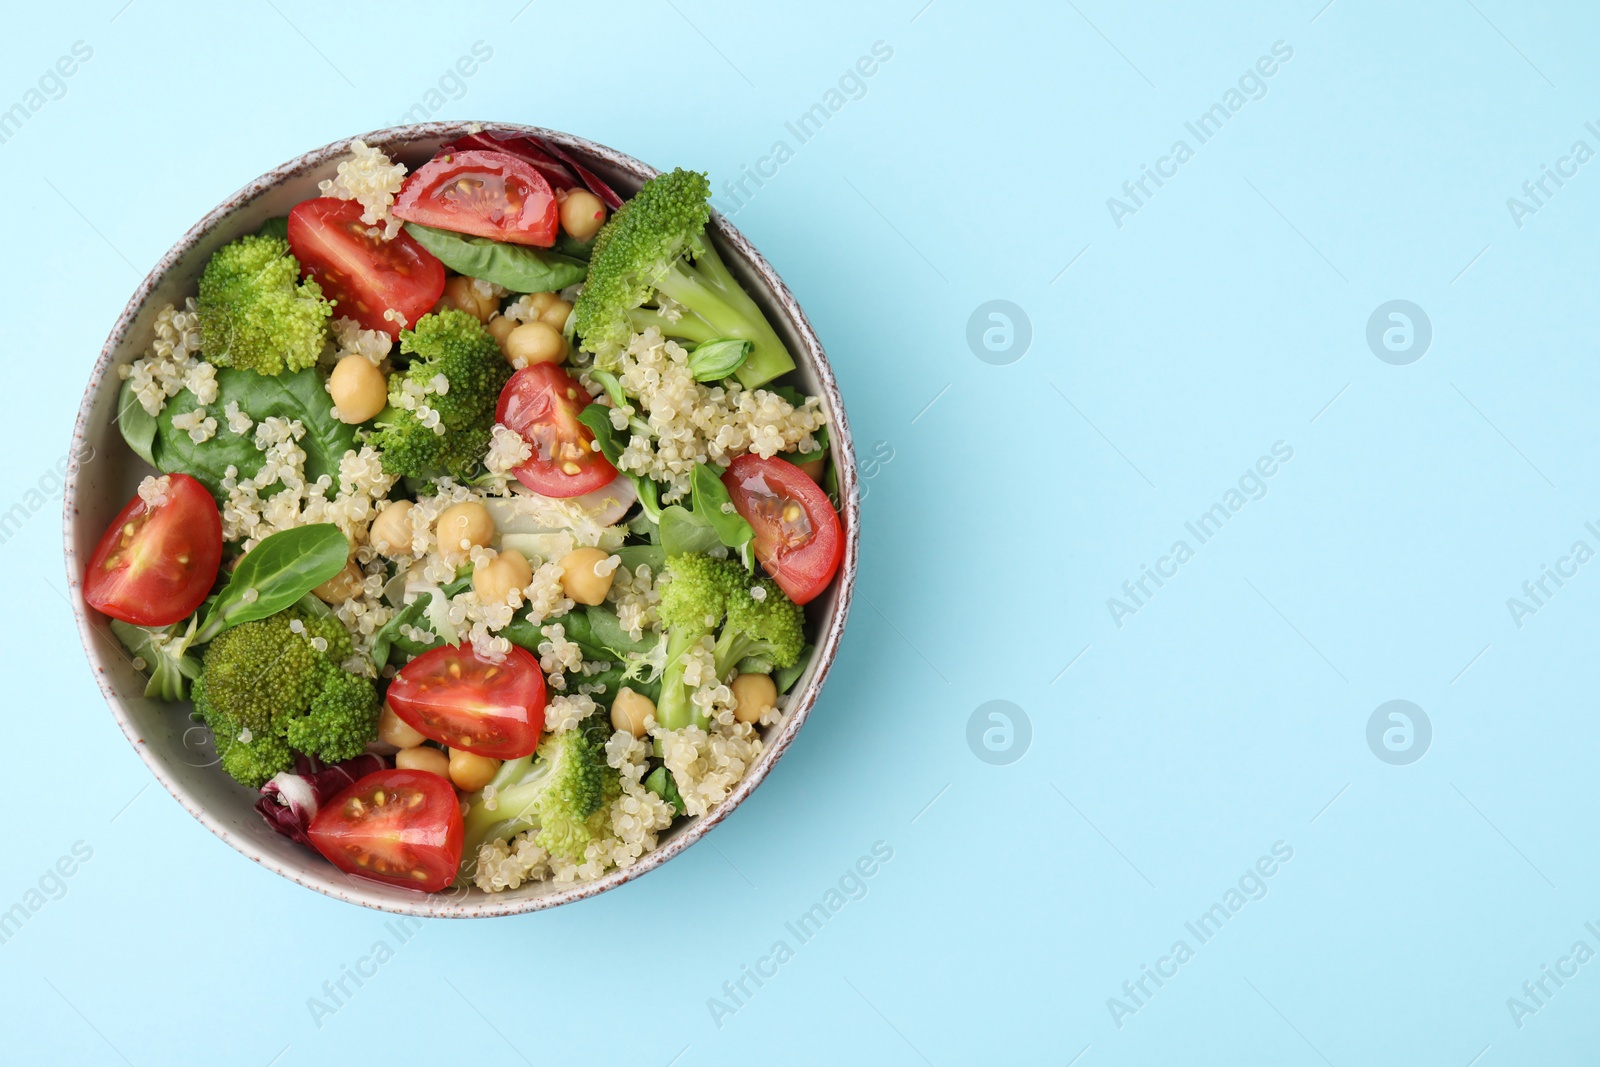 Photo of Healthy meal. Tasty salad with quinoa, chickpeas and vegetables on light blue table, top view with space for text